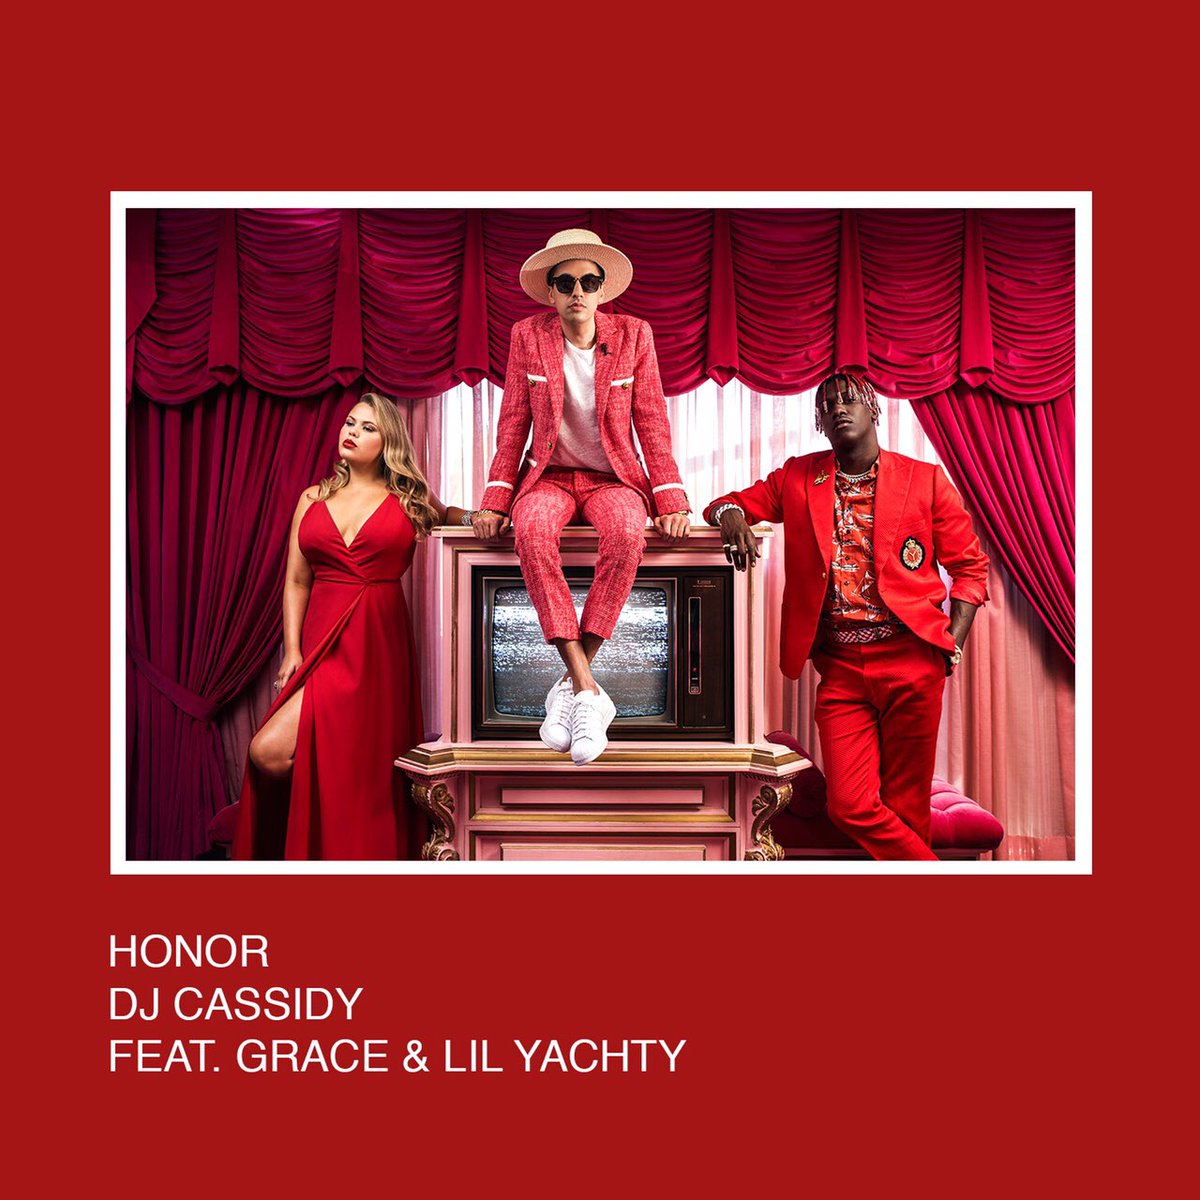 My boy @djcassidy just released a summer anthem! Honor feat. @officialgrace & @lilyachty out now! https://t.co/99UDEZGmyc